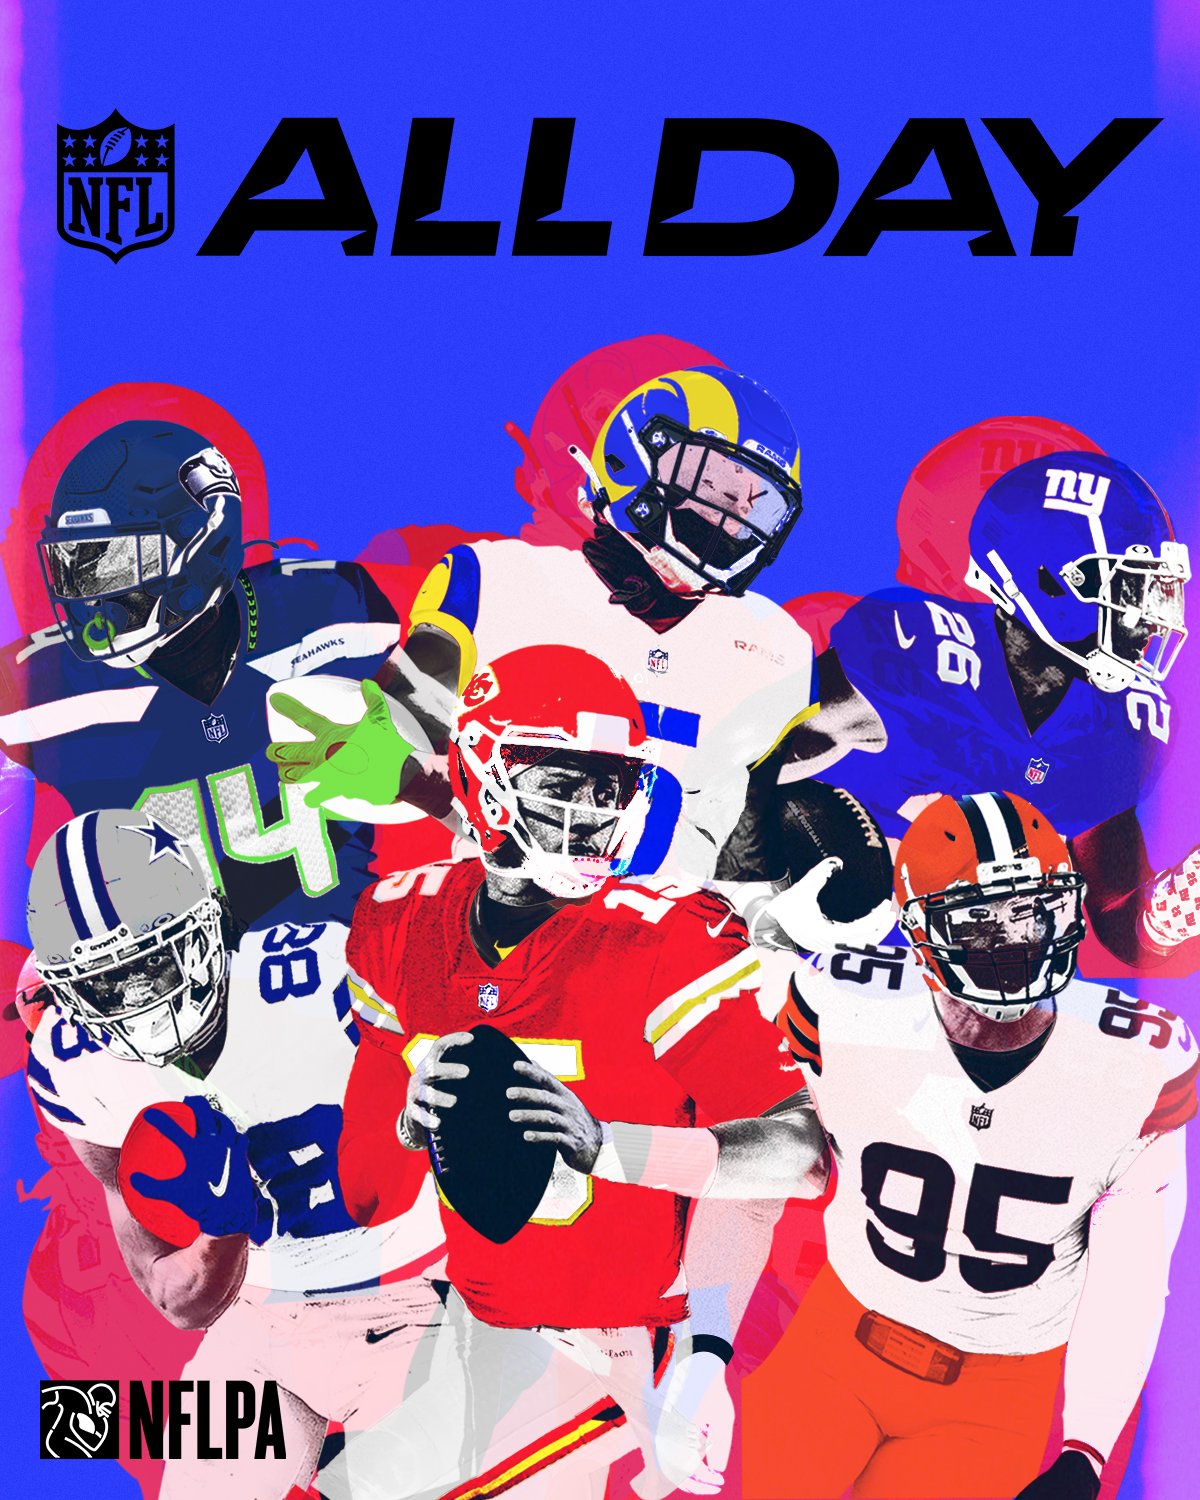 NFL All Day NFT platform for sports NFT collection featuring NFL players